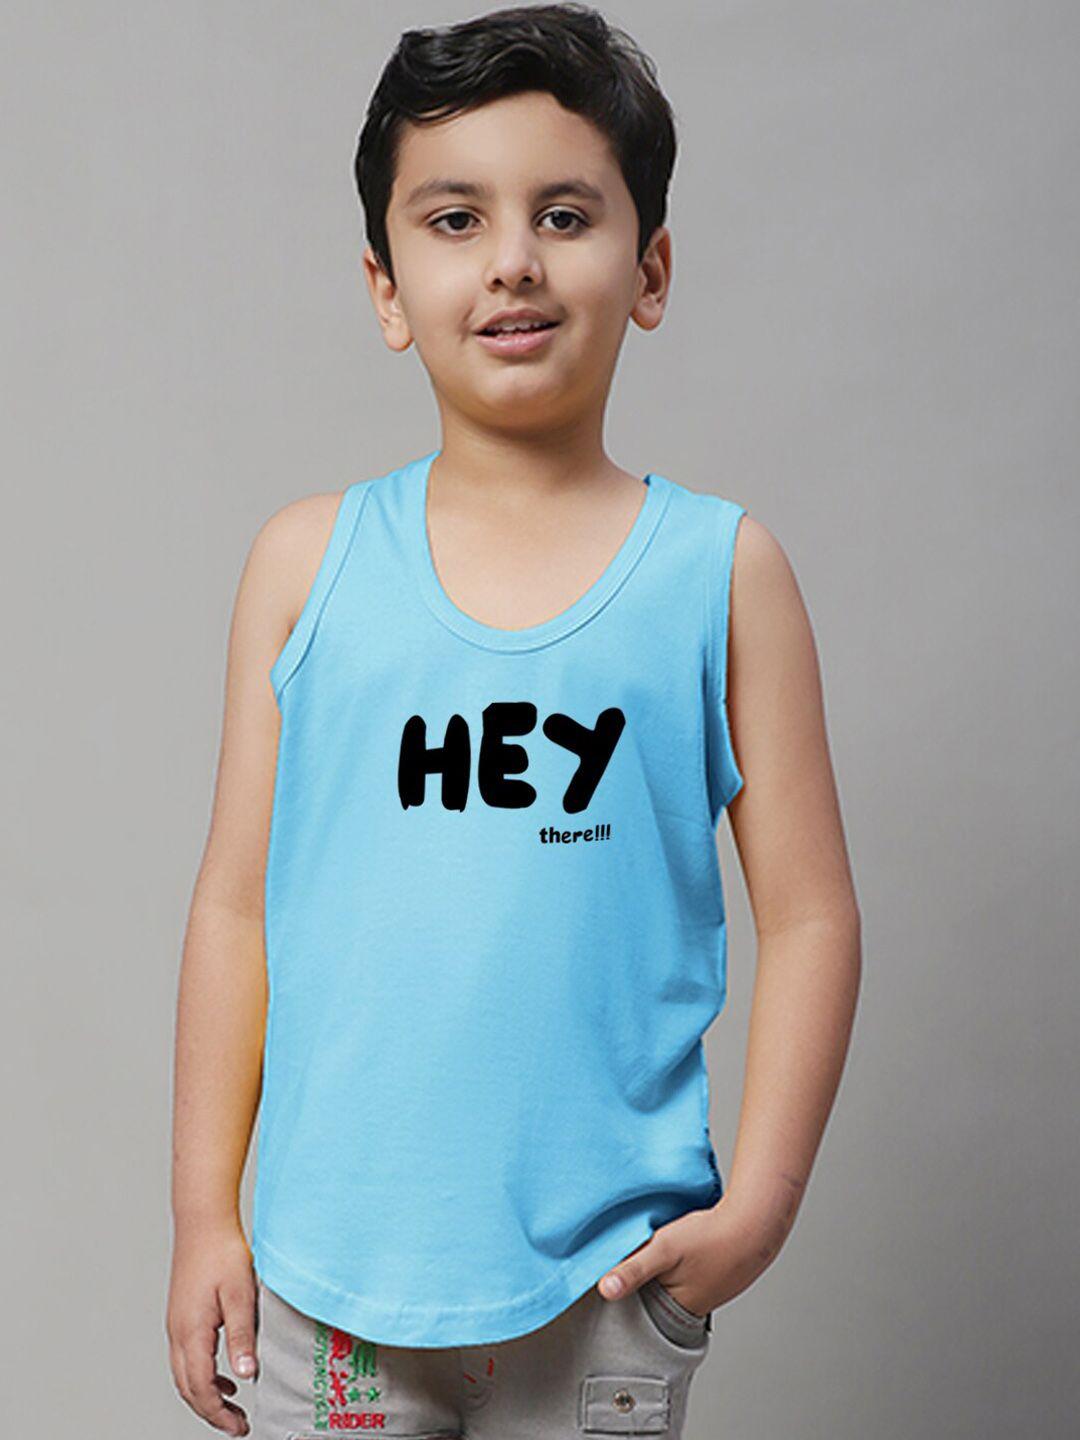 friskers-boys-bio-wash-hey-there-printed-pure-cotton-innerwear-vest